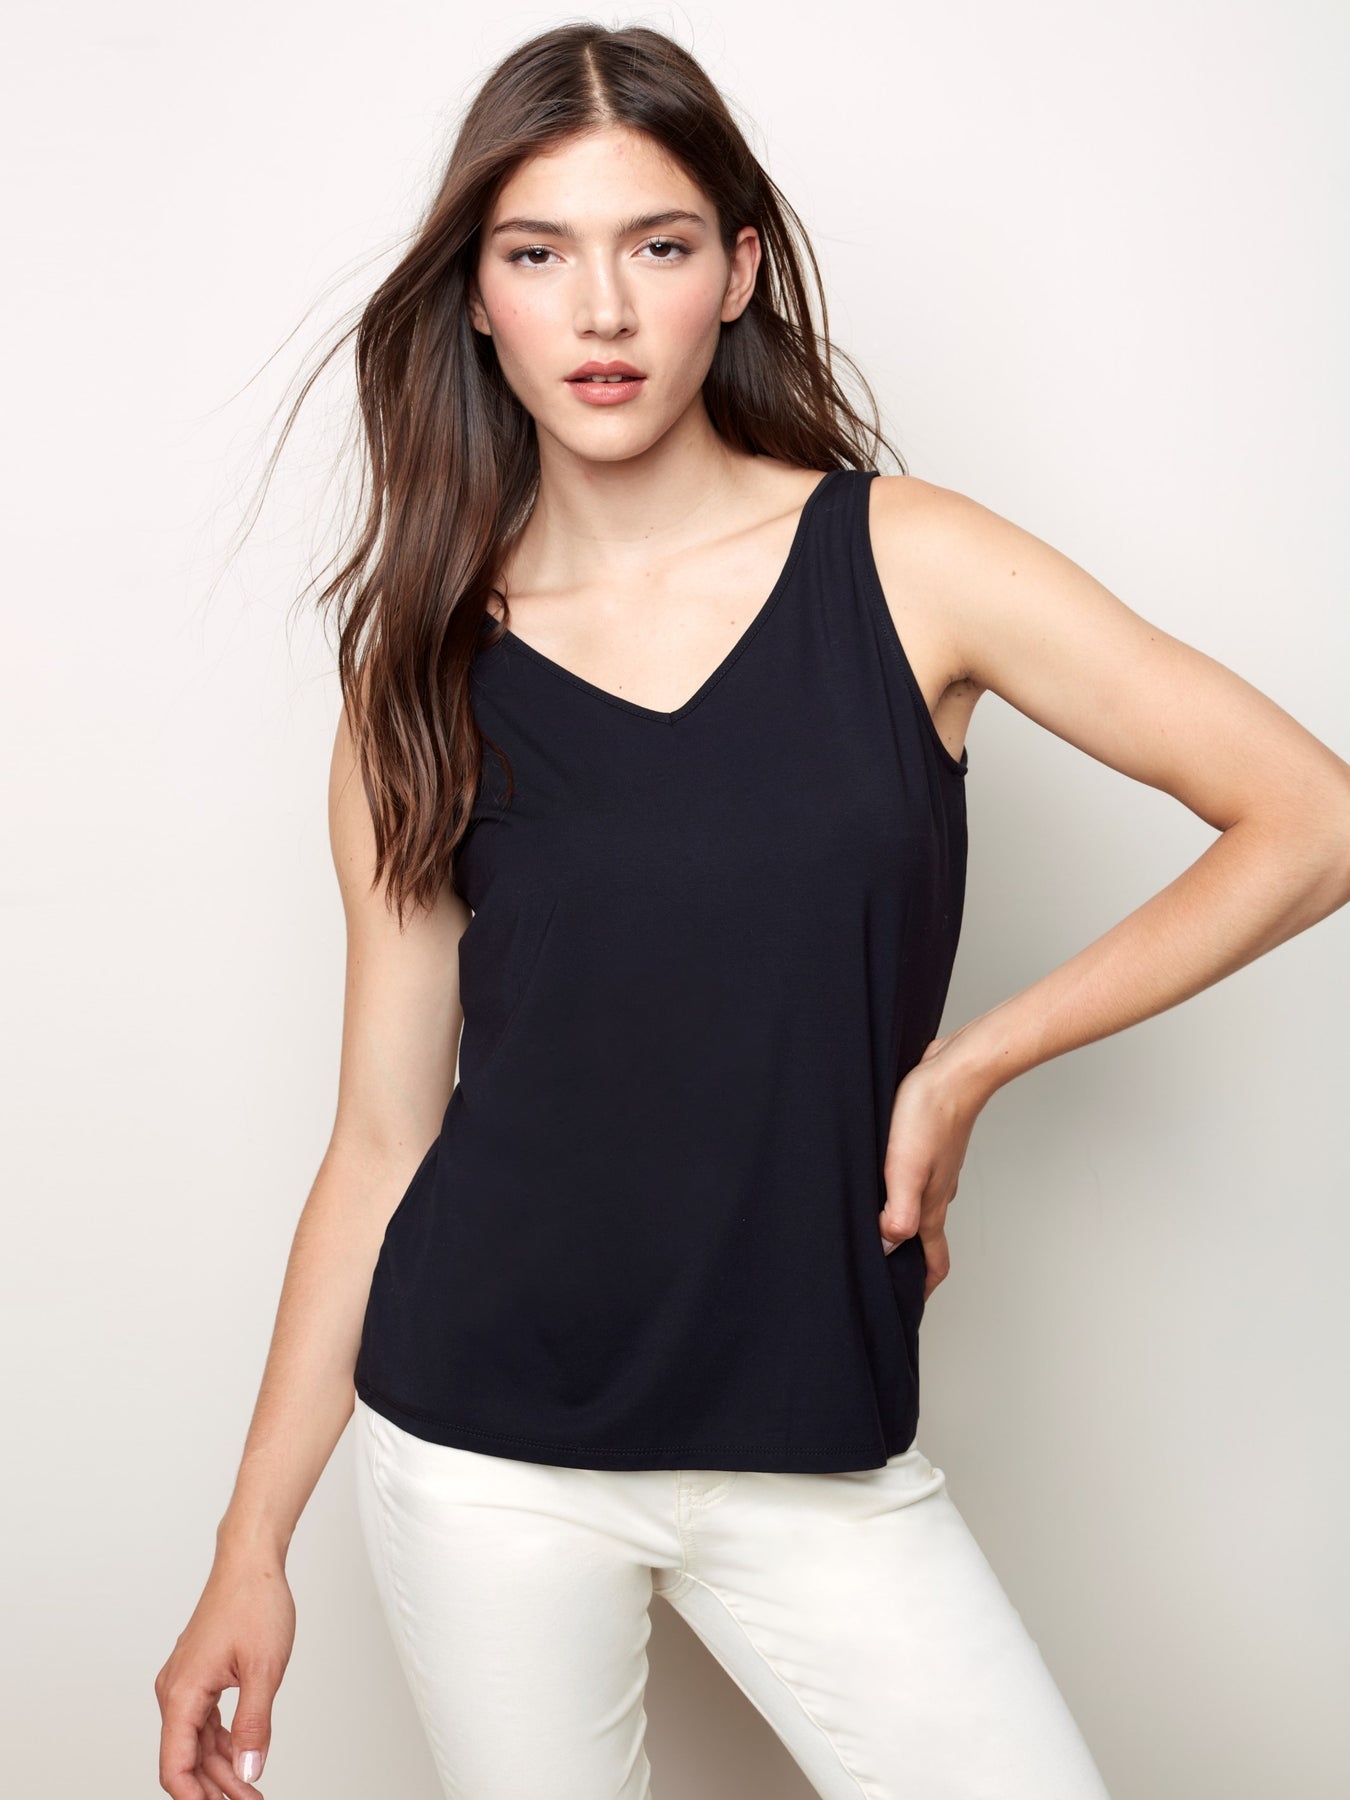 Cami Tank Top, Reversible Bamboo Black Camisole